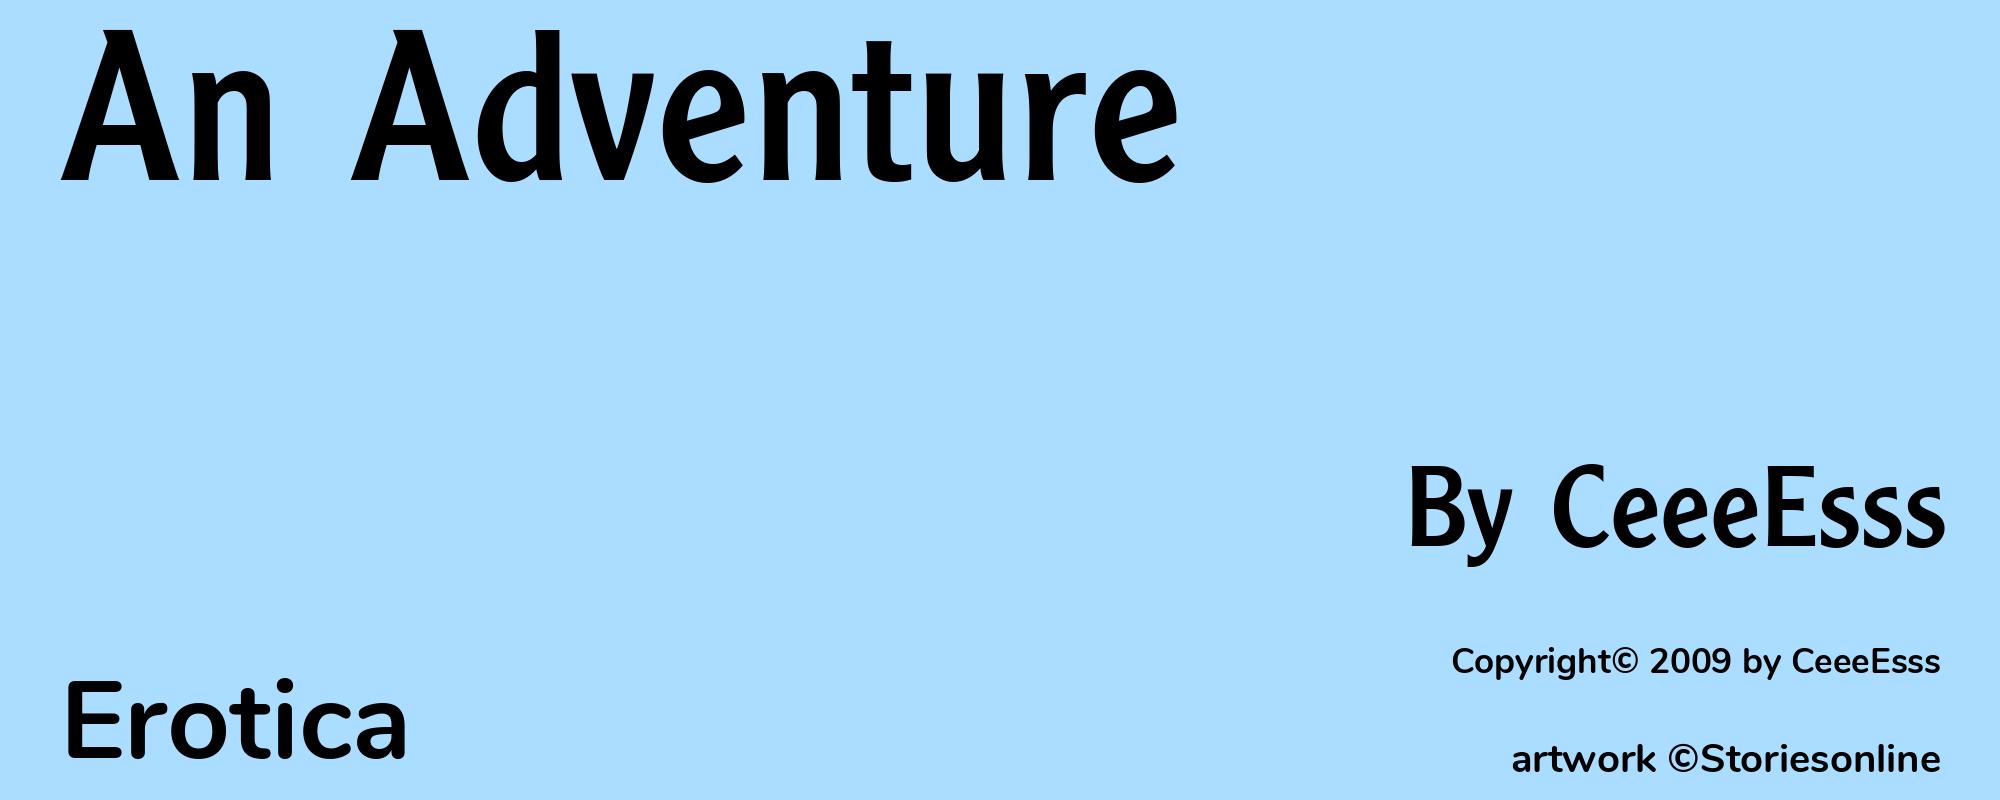 An Adventure - Cover